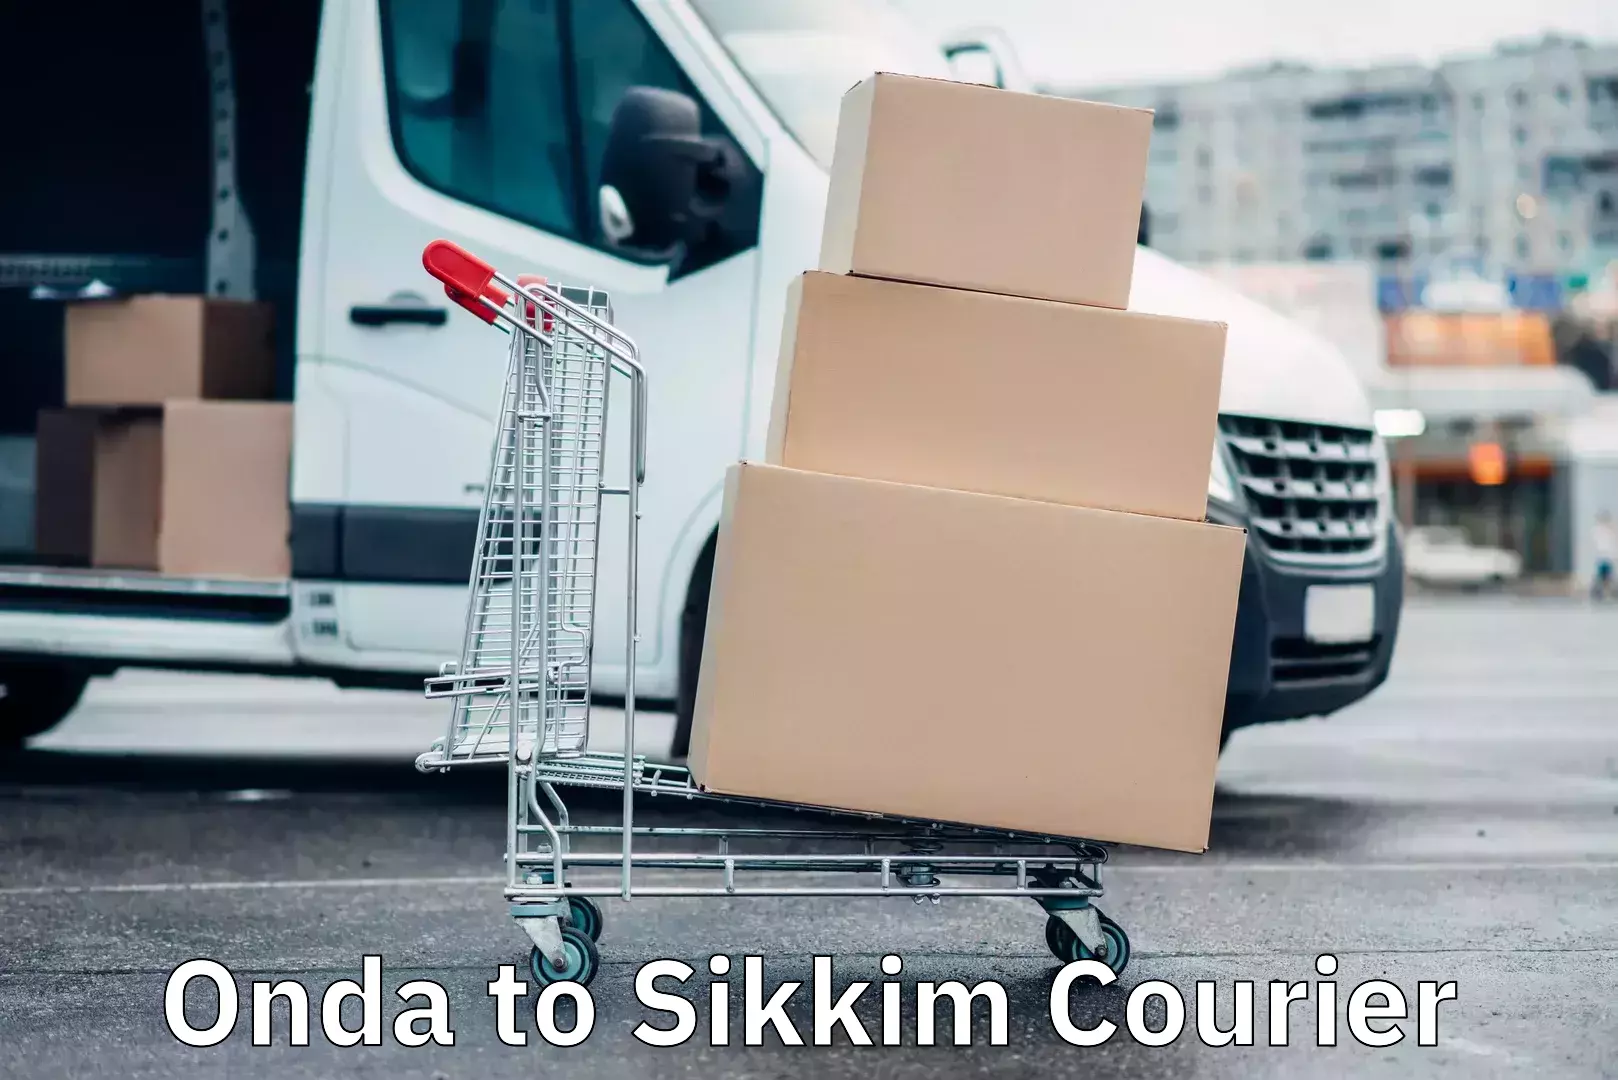 Round-the-clock parcel delivery in Onda to Sikkim